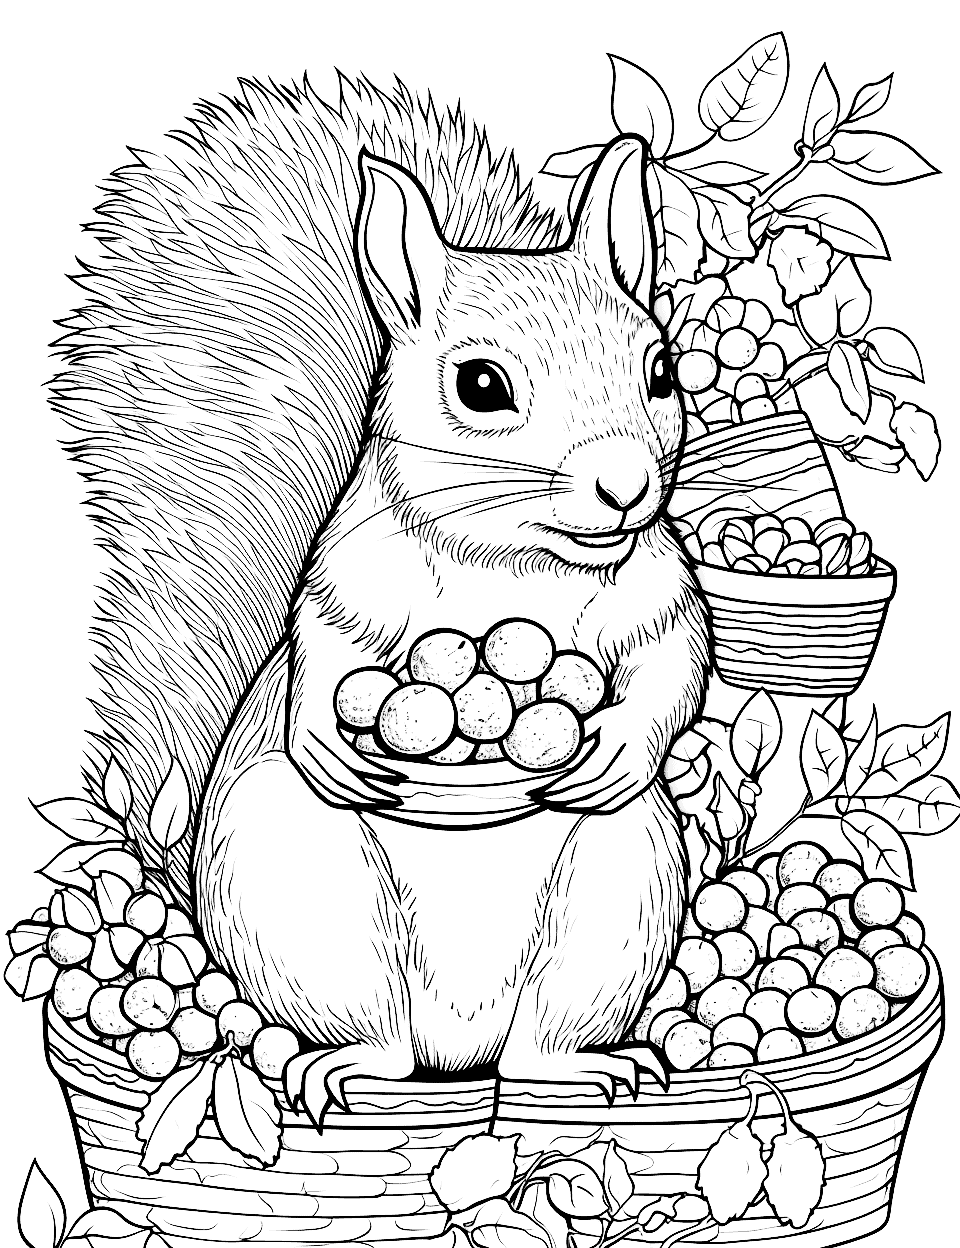 Squirrel's Nut Stash Adult Coloring Page - A squirrel with a stash of acorns ready for winter.